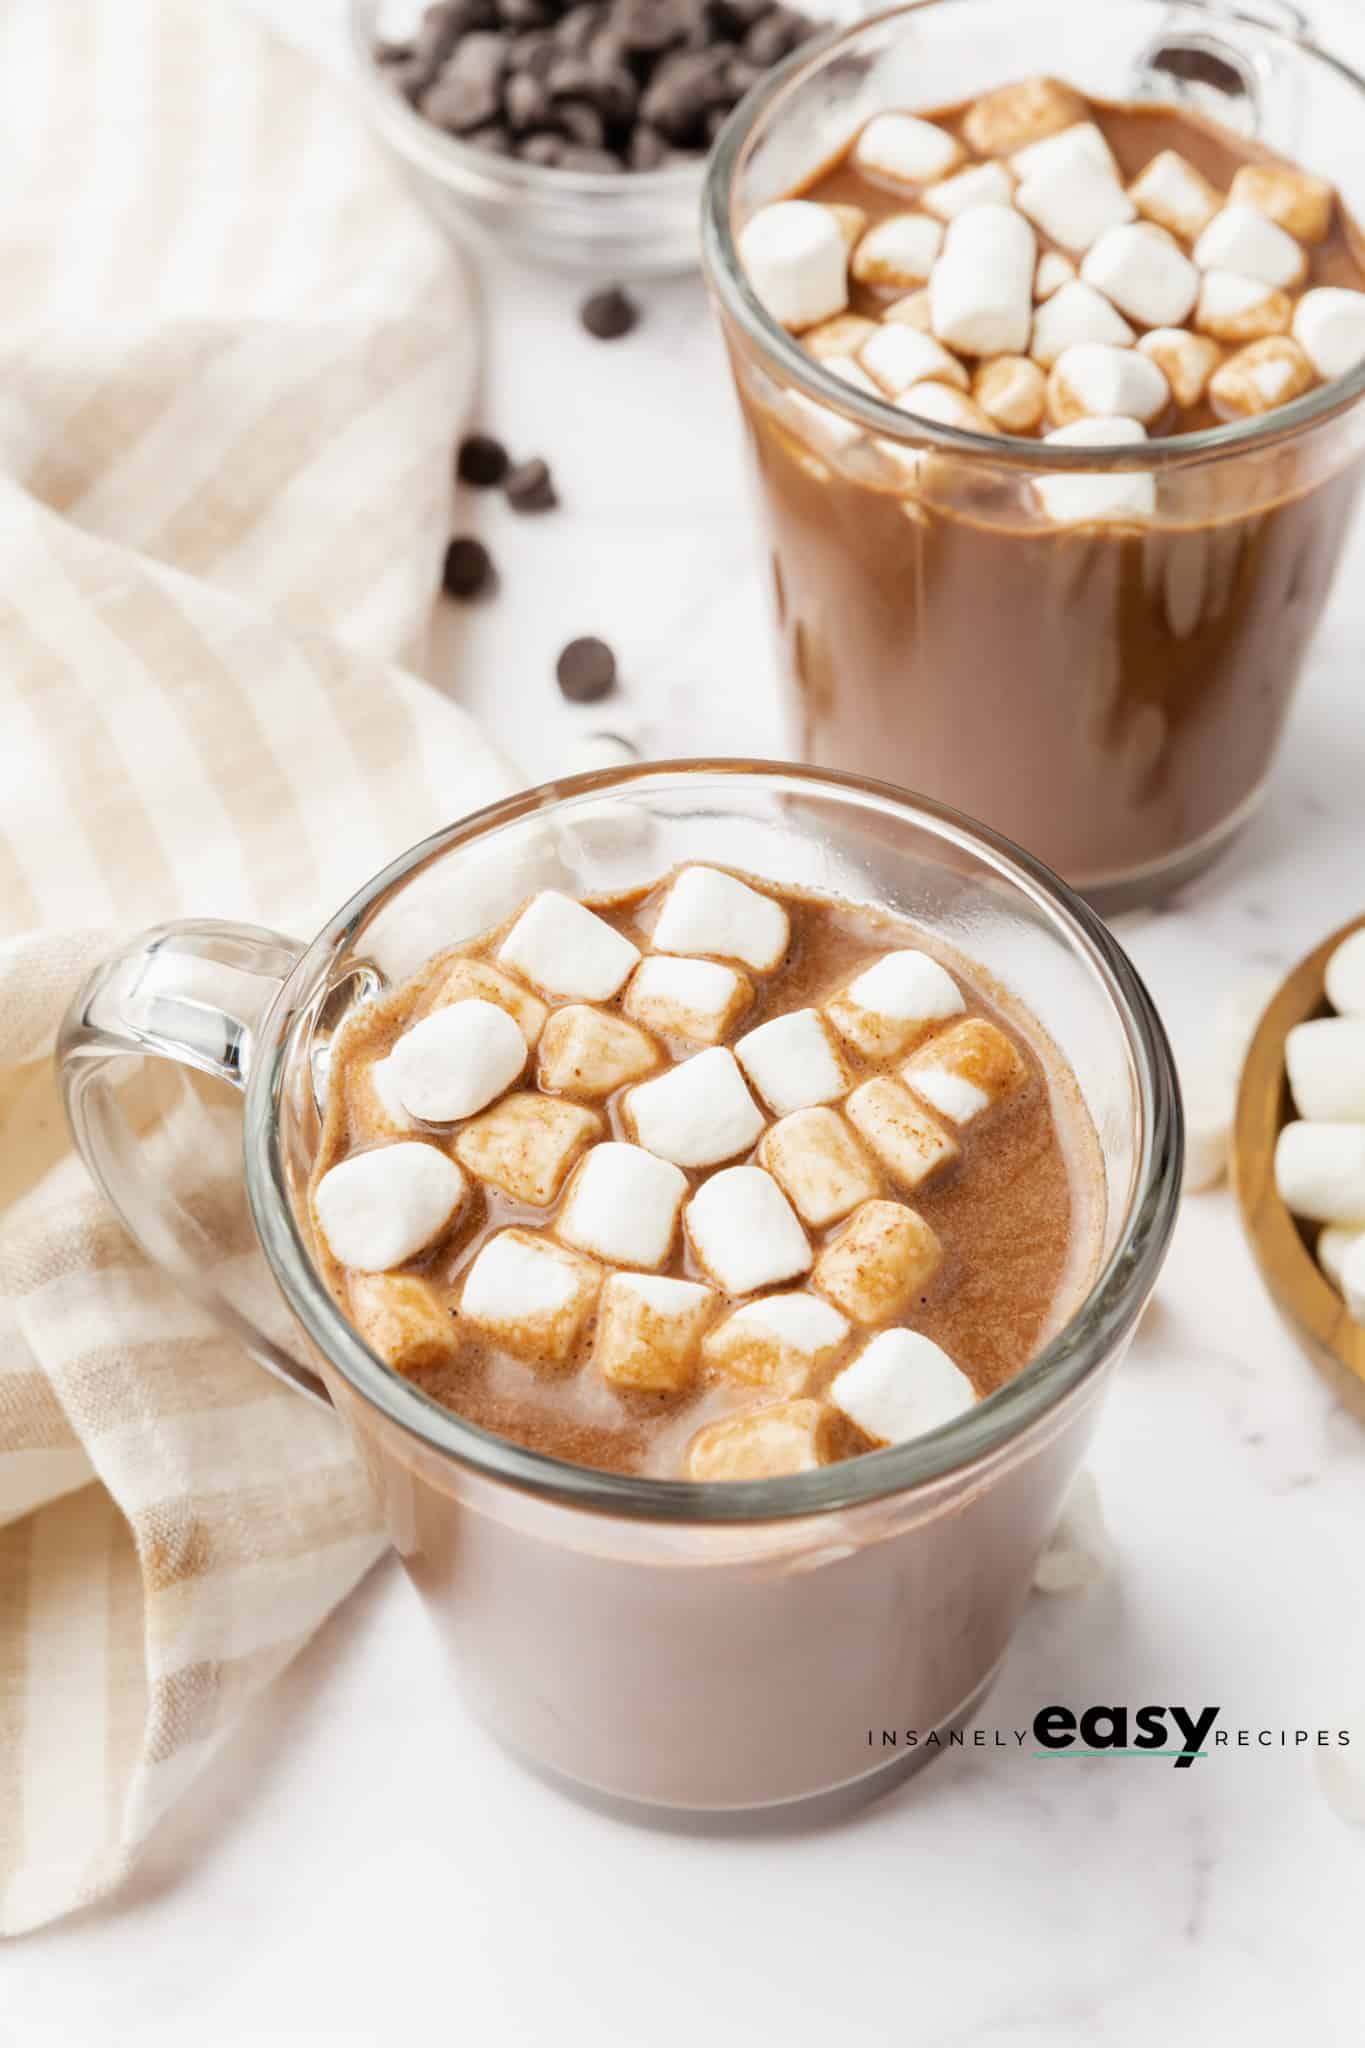 Photo of a glass mug willed with Vegan Hot Chocolate and mini marshmallows. There is a kitchen towel to the left of the mug, and another mug of hot chocolate behind the center mug. 